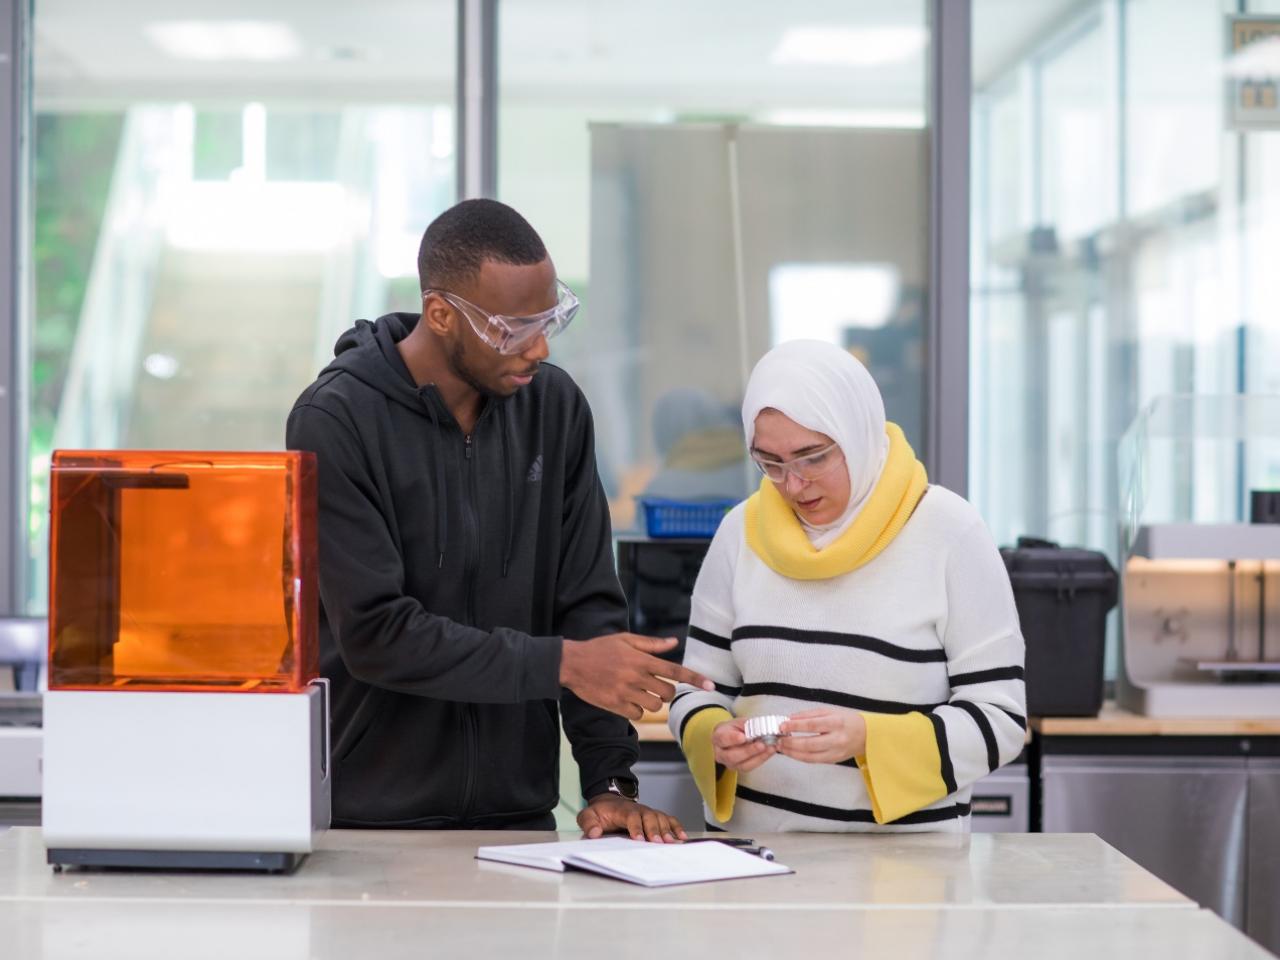 Jordan Kamga (on the left) a Mechanical Engineering coop student from Dalhousie University and NSCC Research Assistant Shaza Abumousa